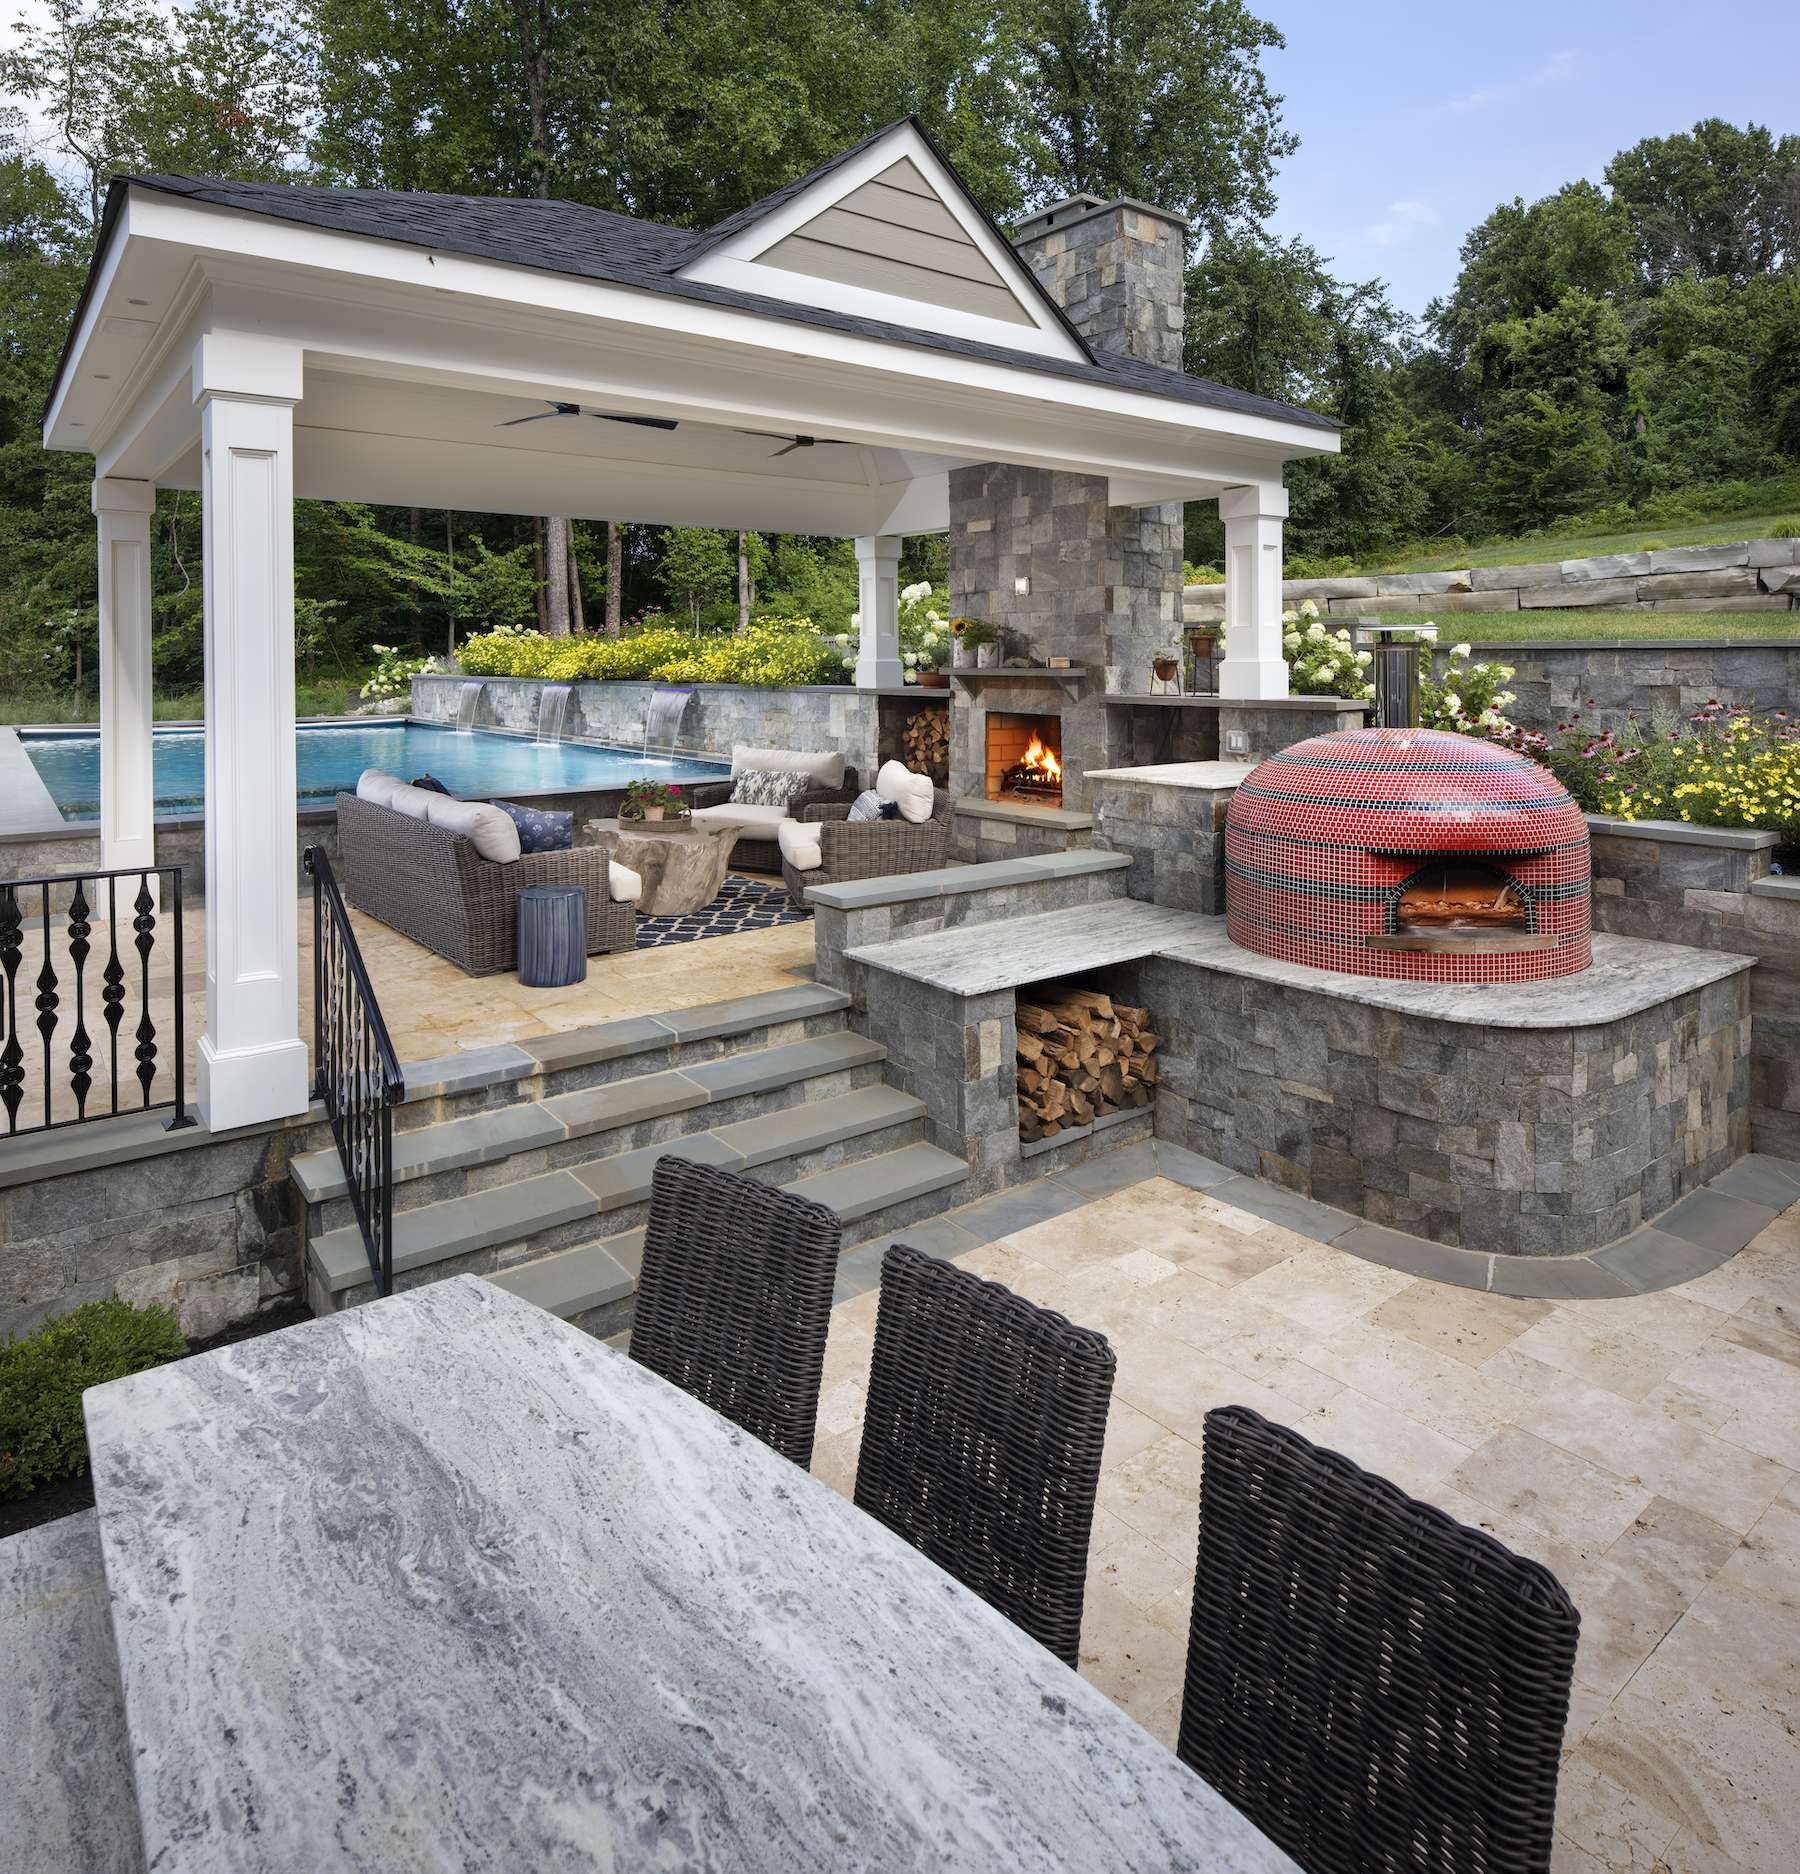 Pavillion and fireplace next to a pool